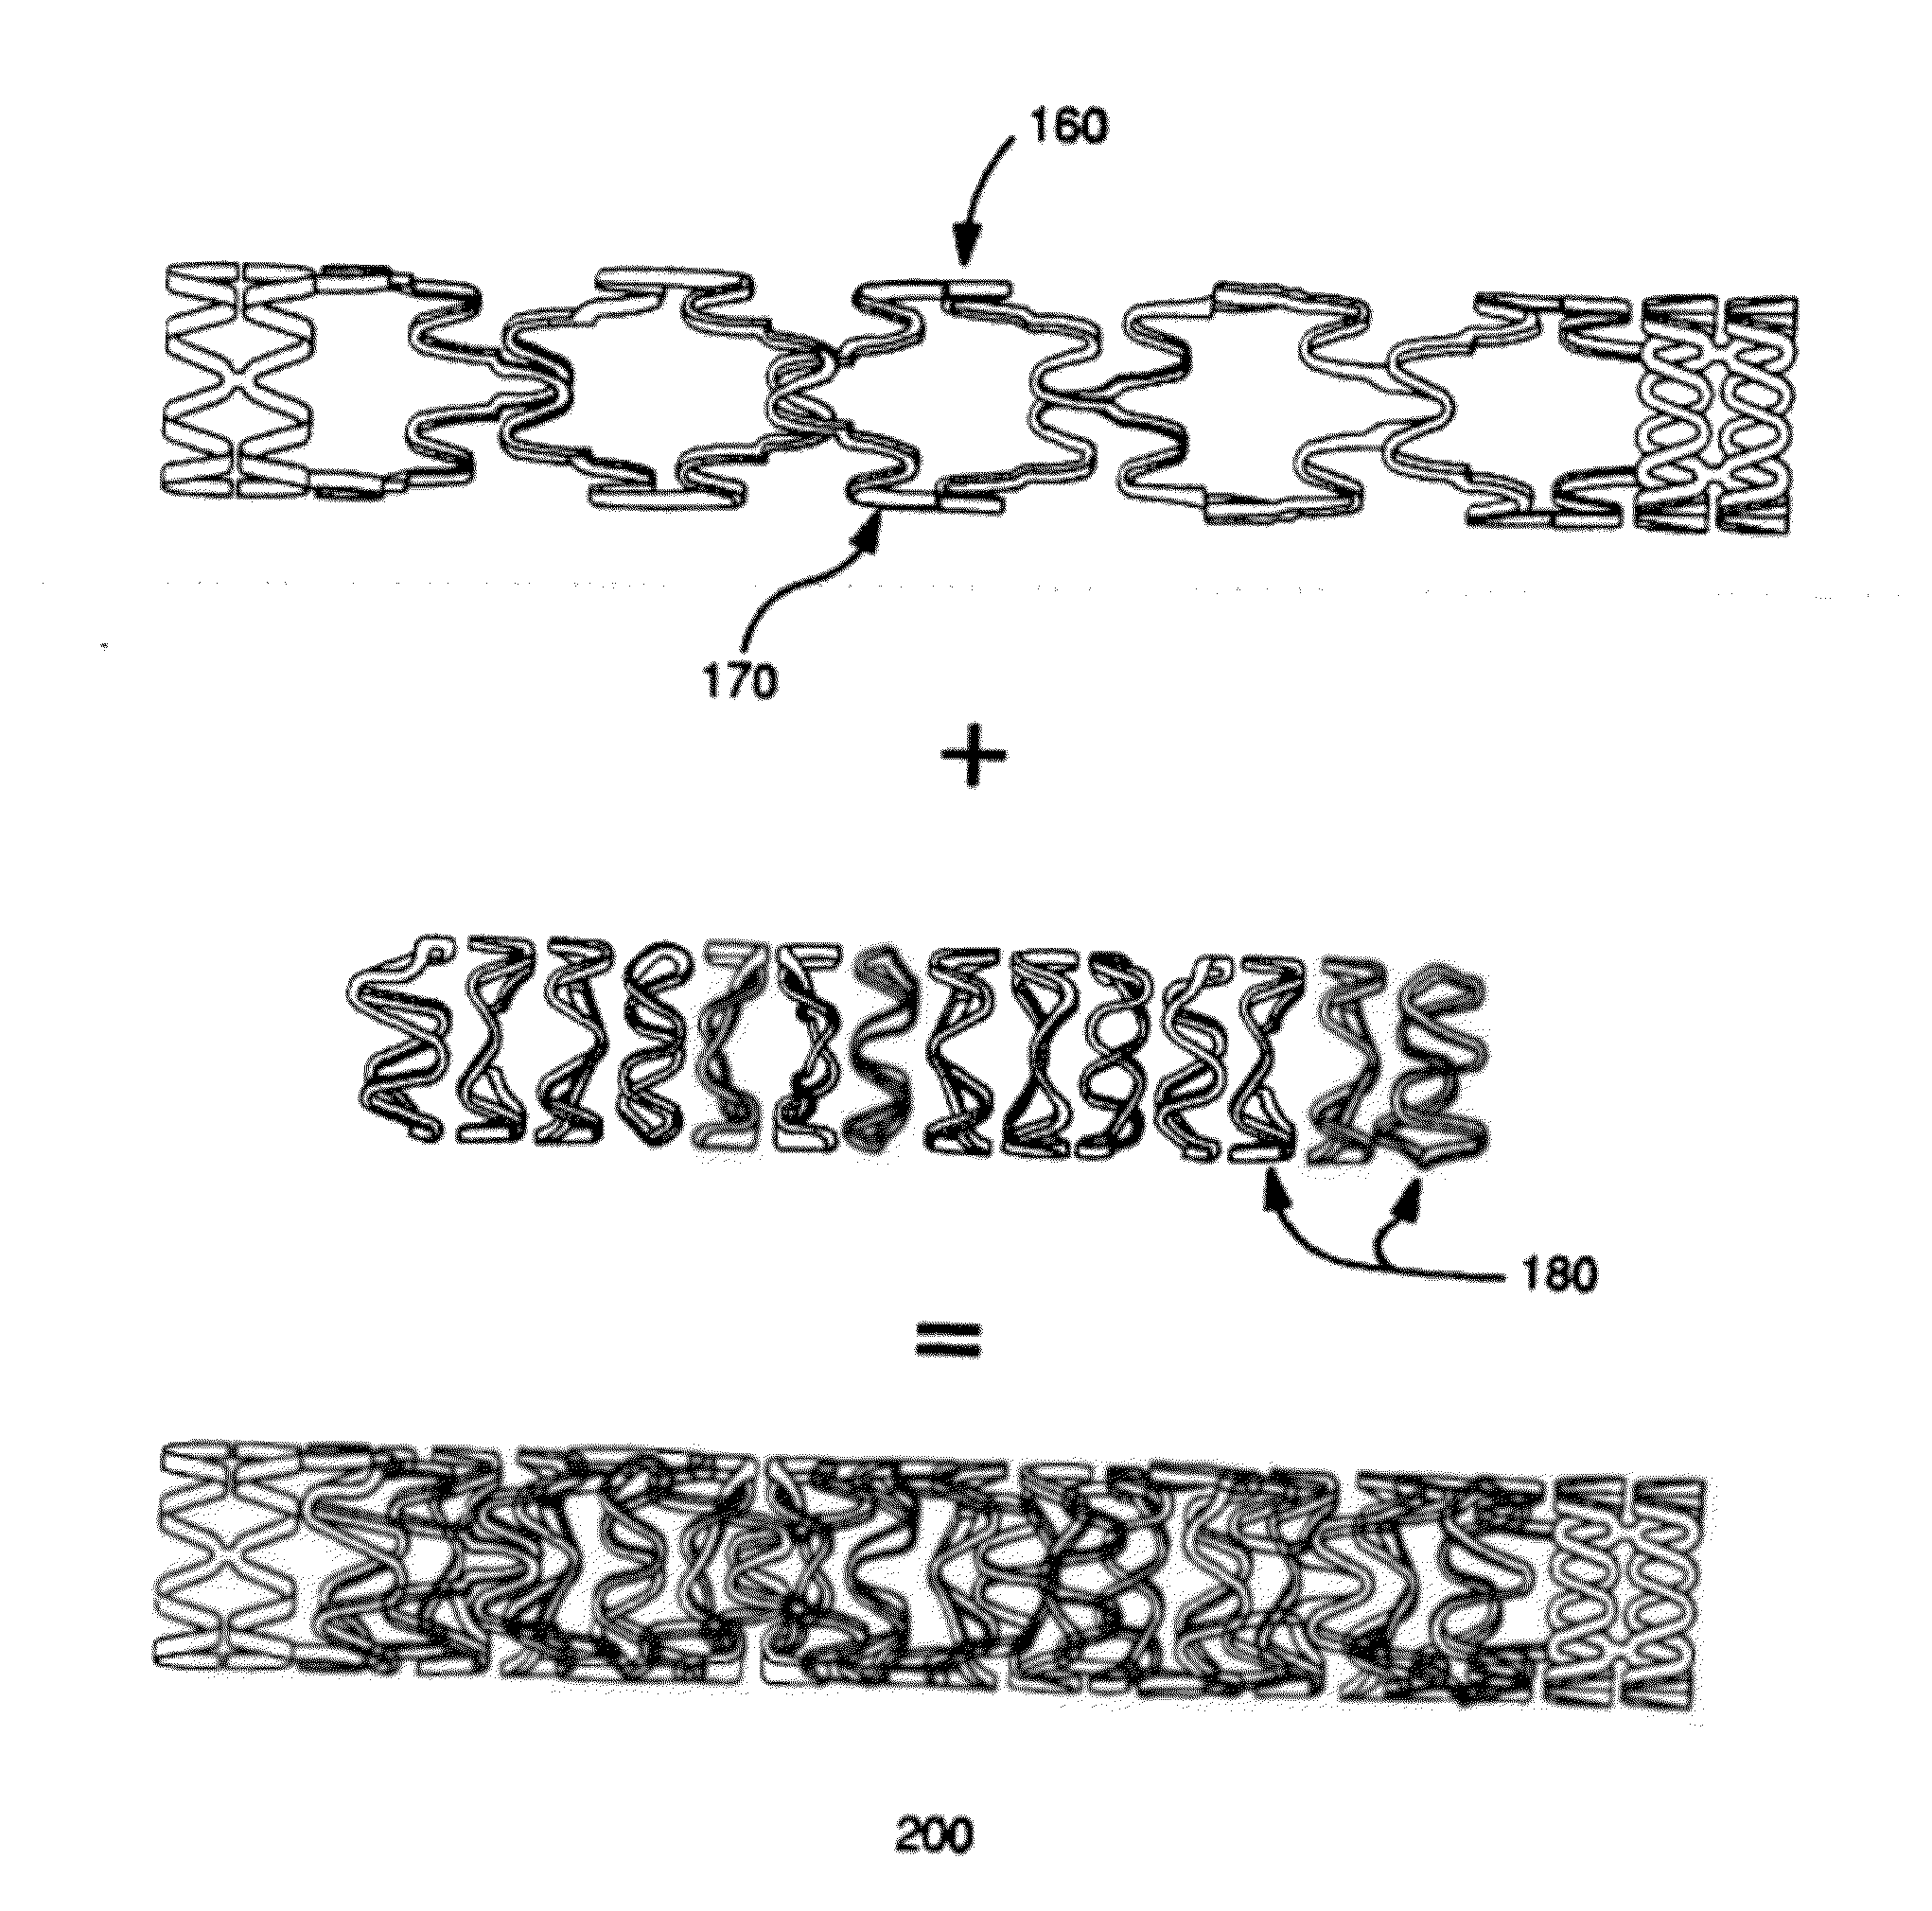 Progenitor endothelial cell capturing with a drug eluting implantable medical device